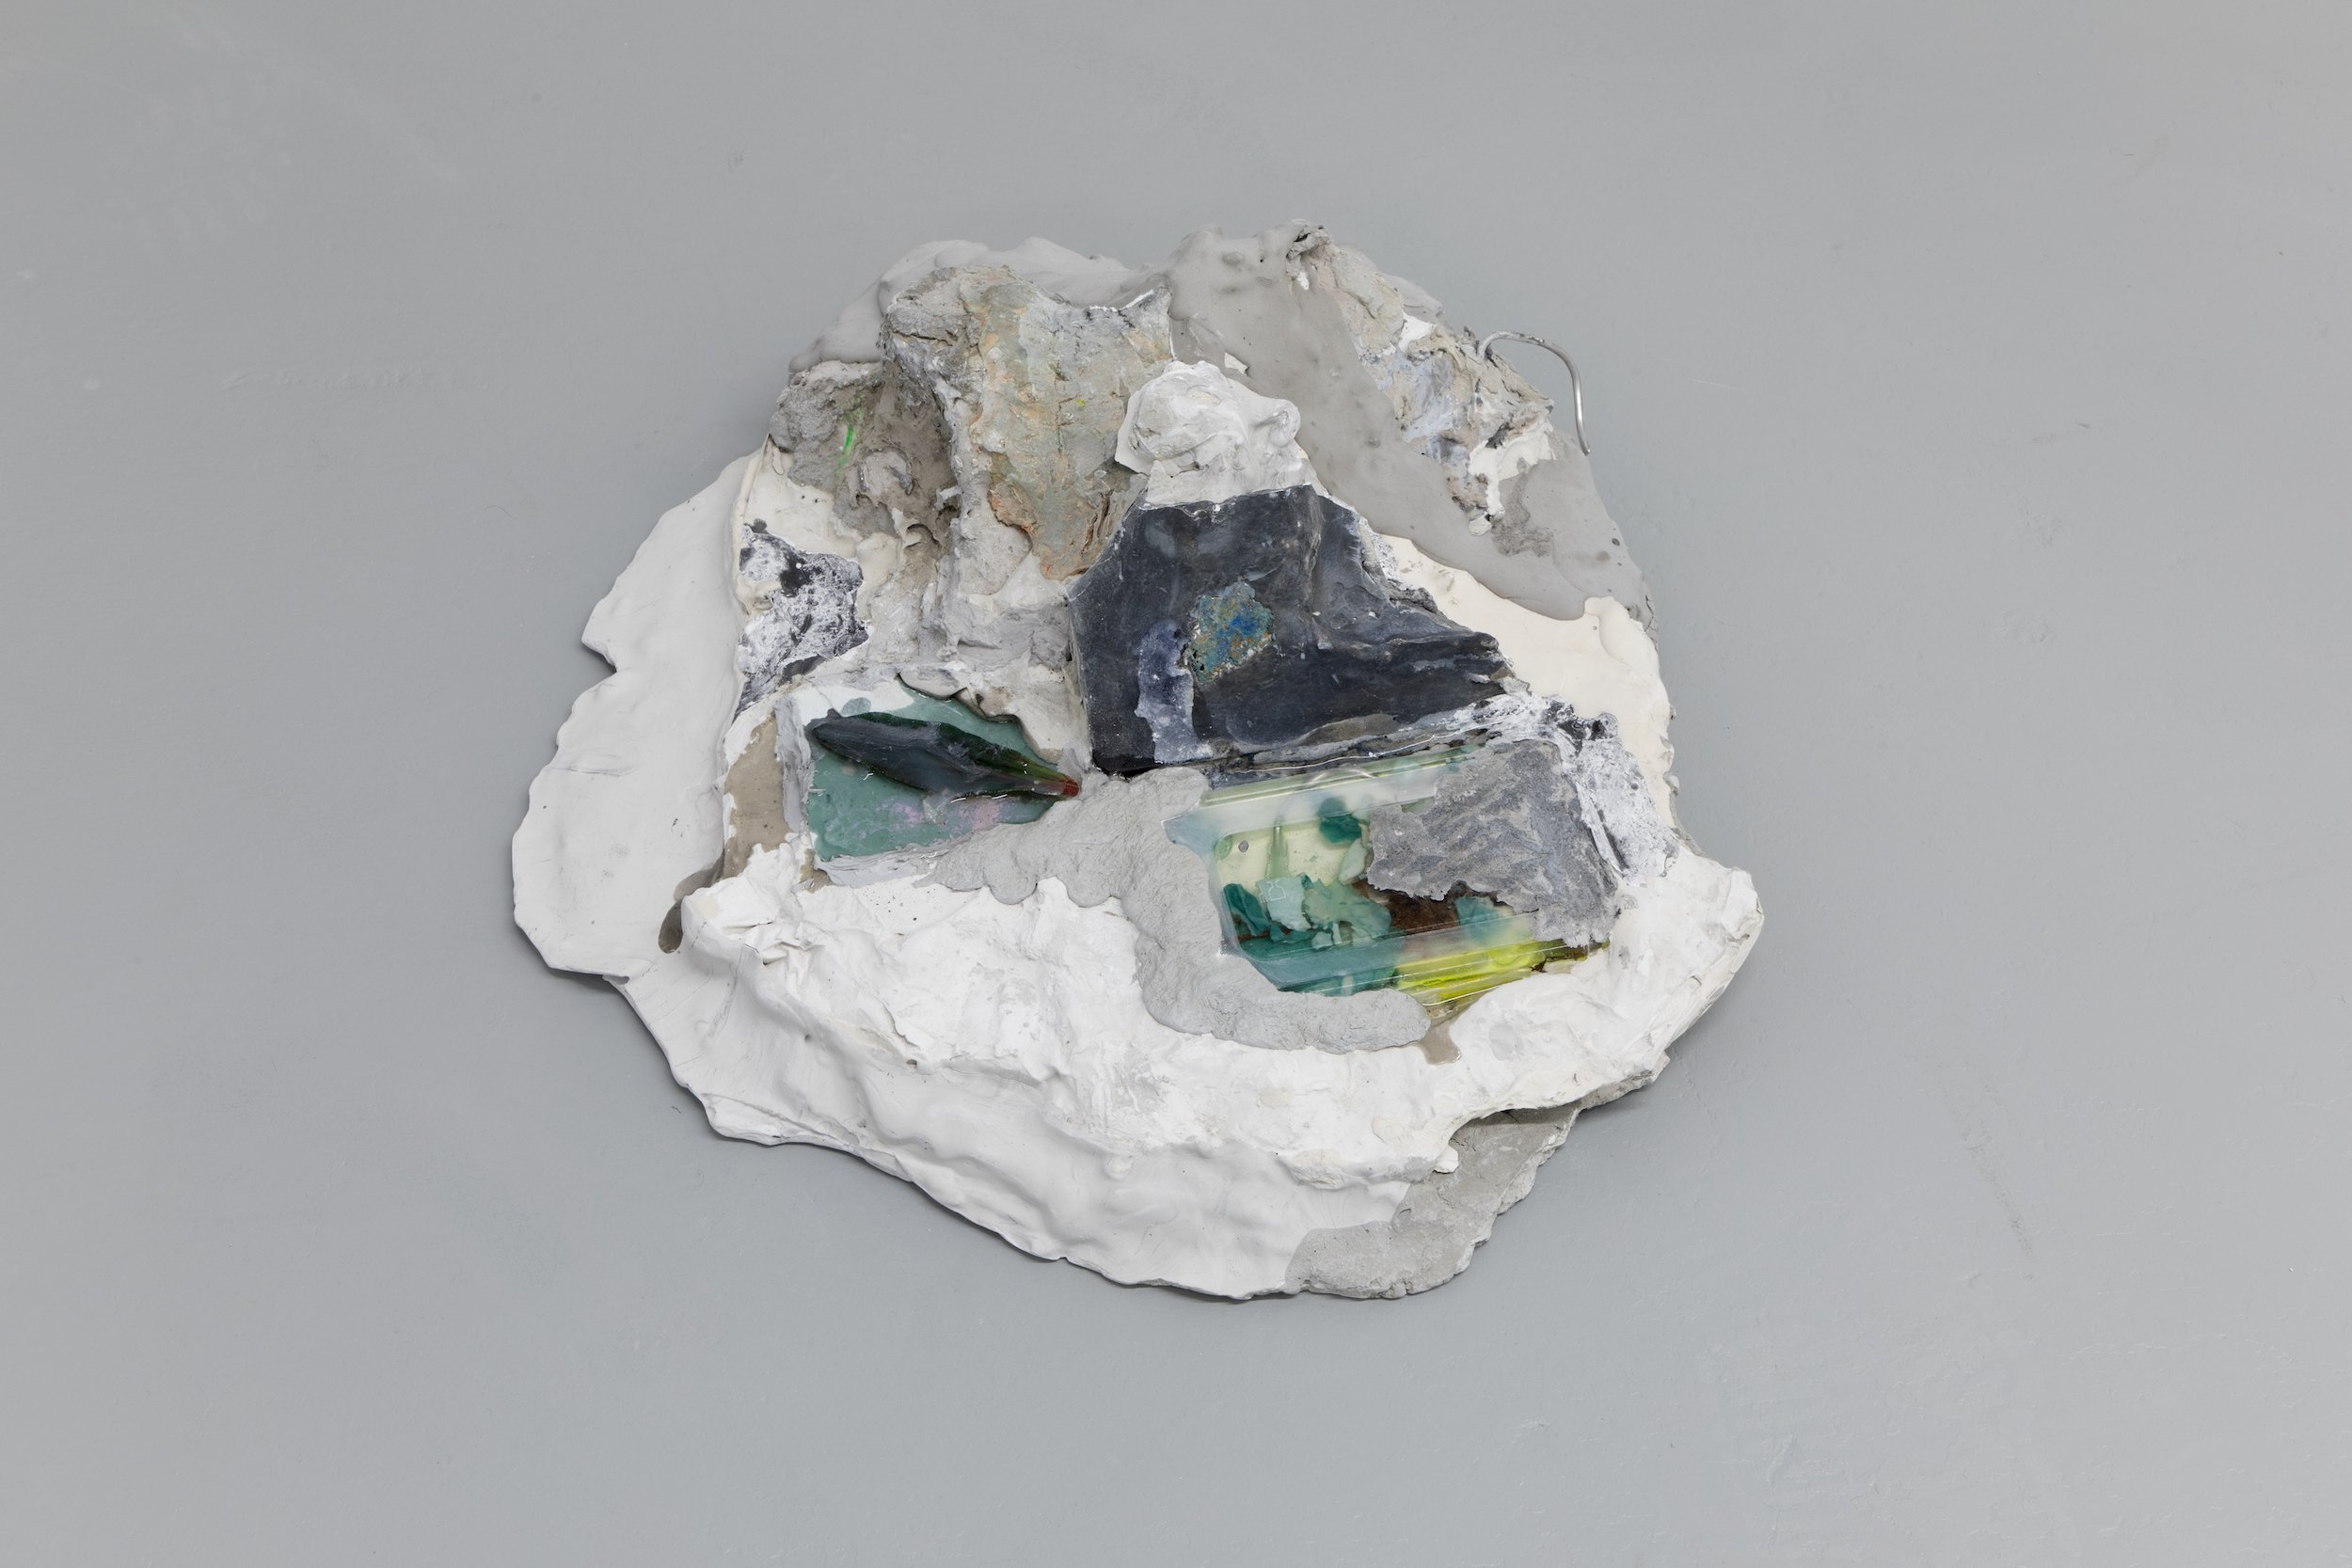  Laur P,  When the rays sweat a softer kind of anger , 2024, Plaster, cement, paper pulp, dry pigments, metal wire, plastic glass, plastic sheet, solder metal, plastic lid, epoxy resin, oil-based ink, dead leaf, oil paint residues, two pills of Cital